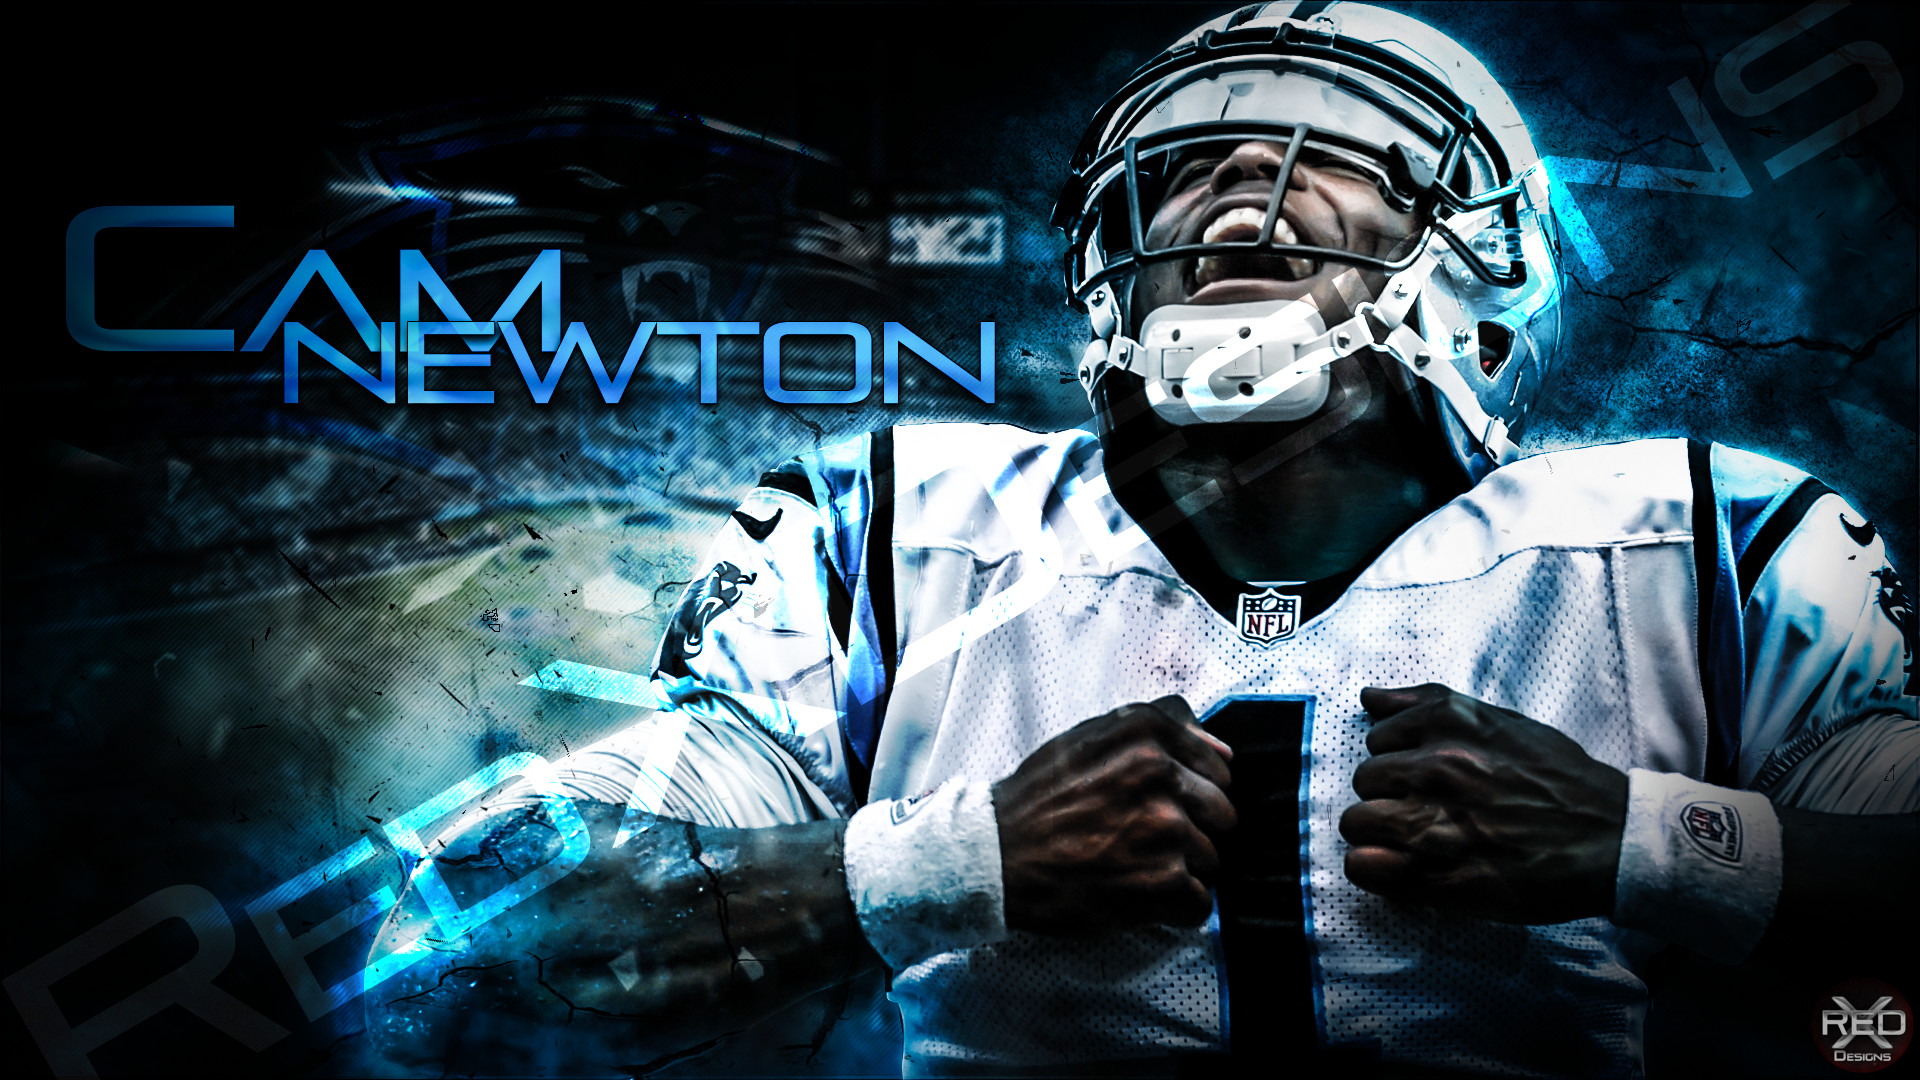 1920x1080 Cam newton  wallpaper for sale - Graphics - Off Topic - Madden NFL  18 Forums - Muthead